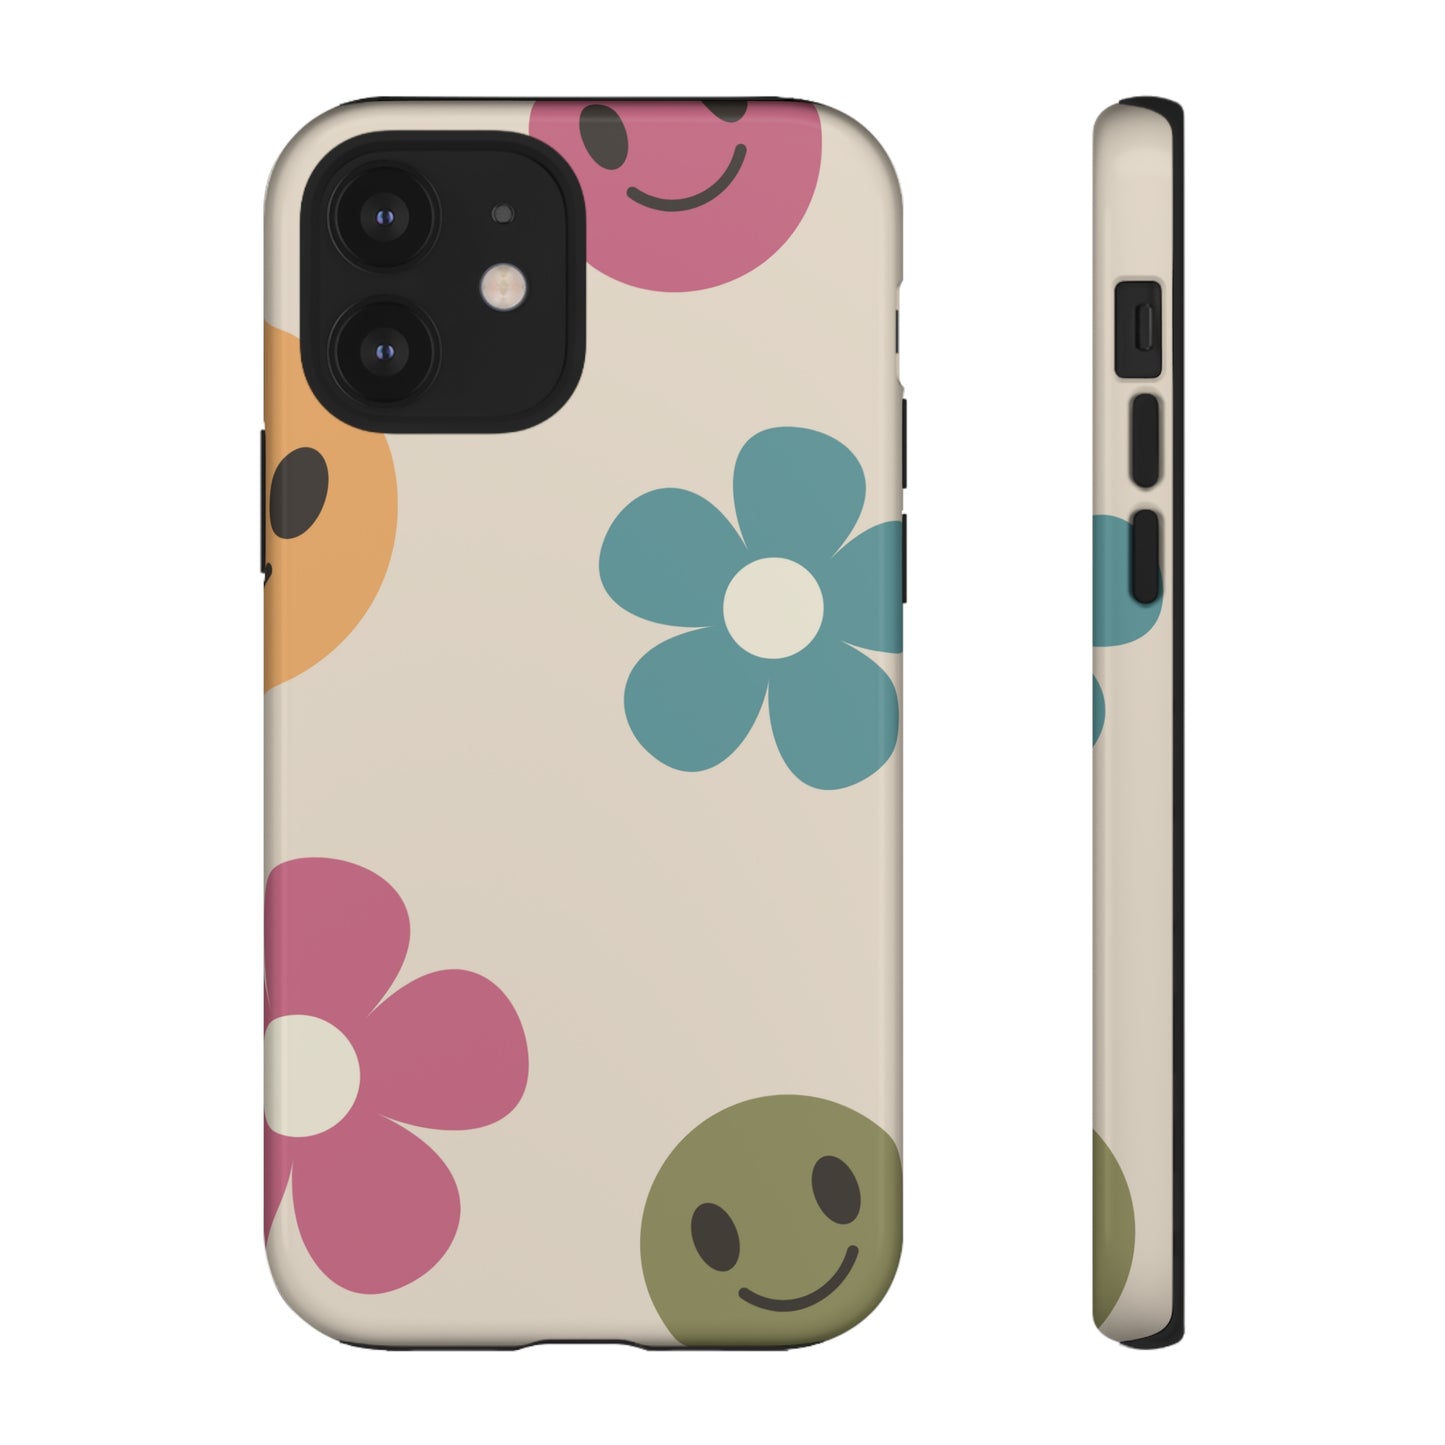 Retro Flower and Smiley Face Cell Phone Case, iPhone, Samsung Galaxy, Google Pixel Tough Cases, Free Shipping, School